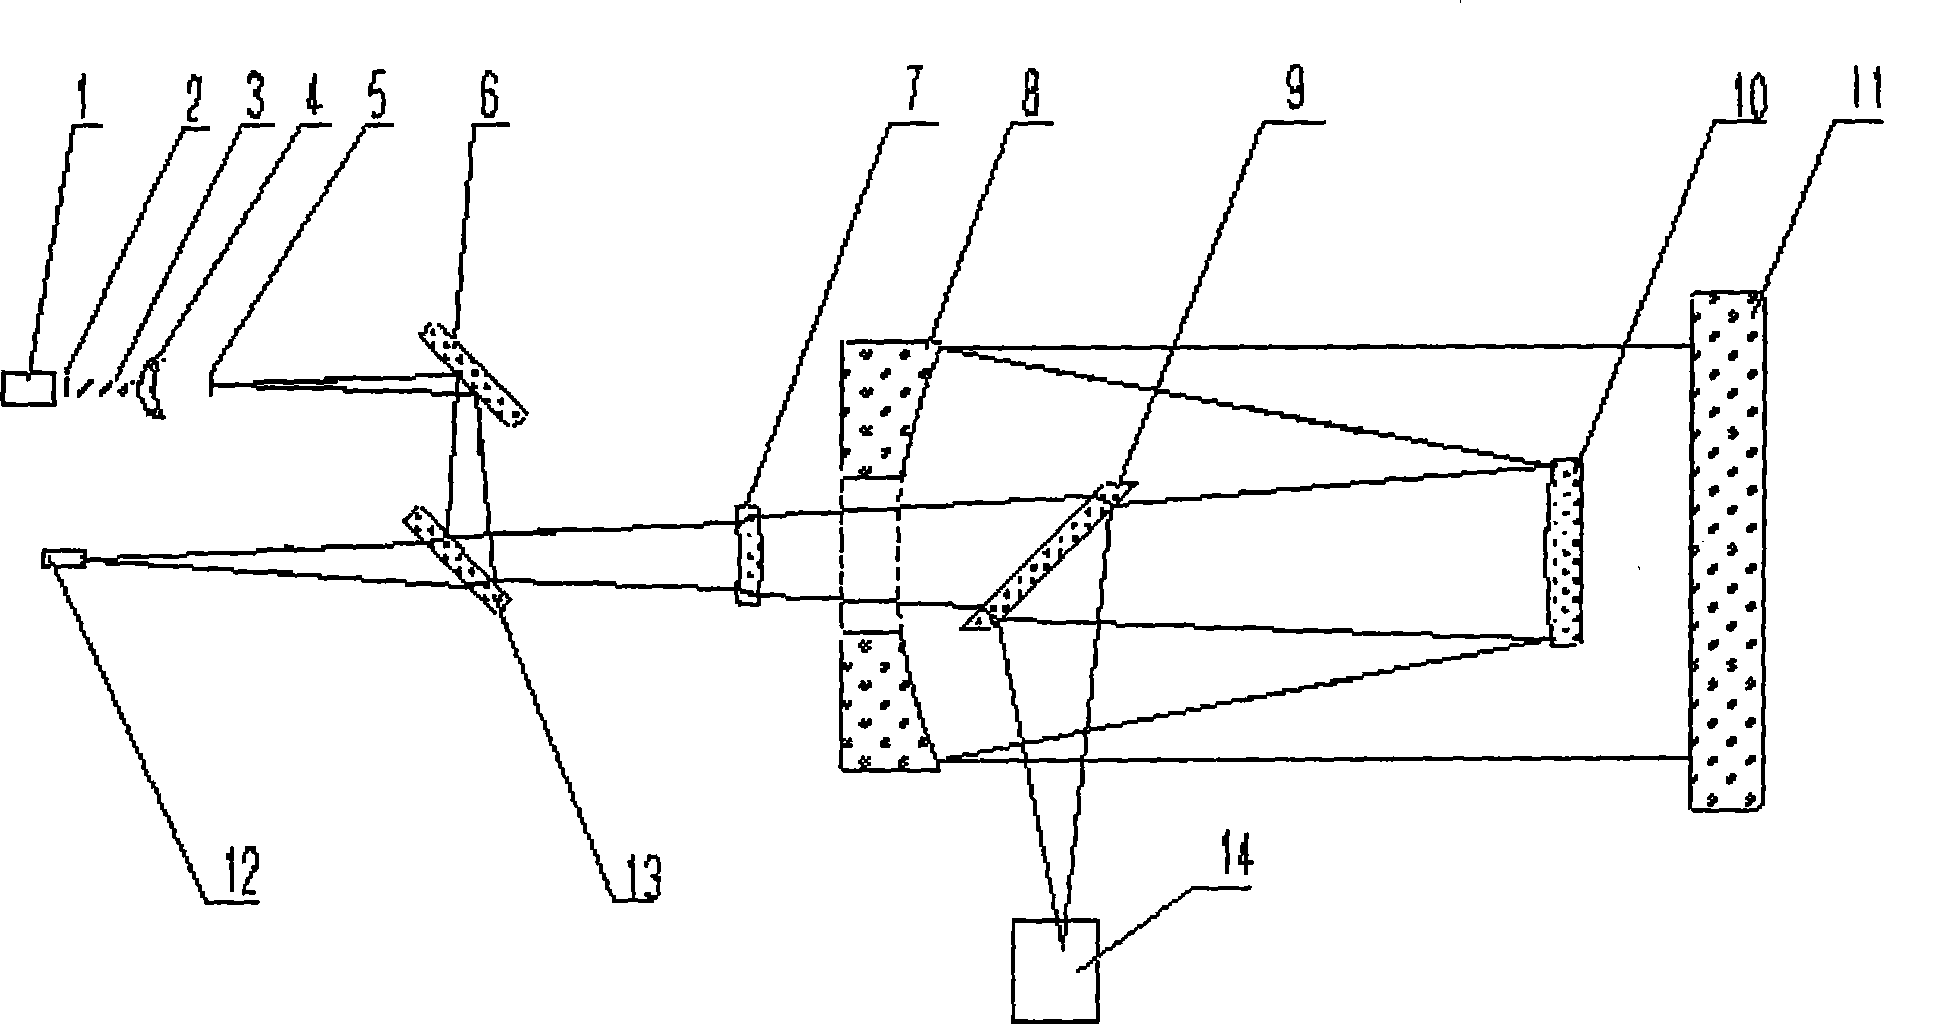 Surveymeter for parallelism of optical axis of visible and infrared light wave